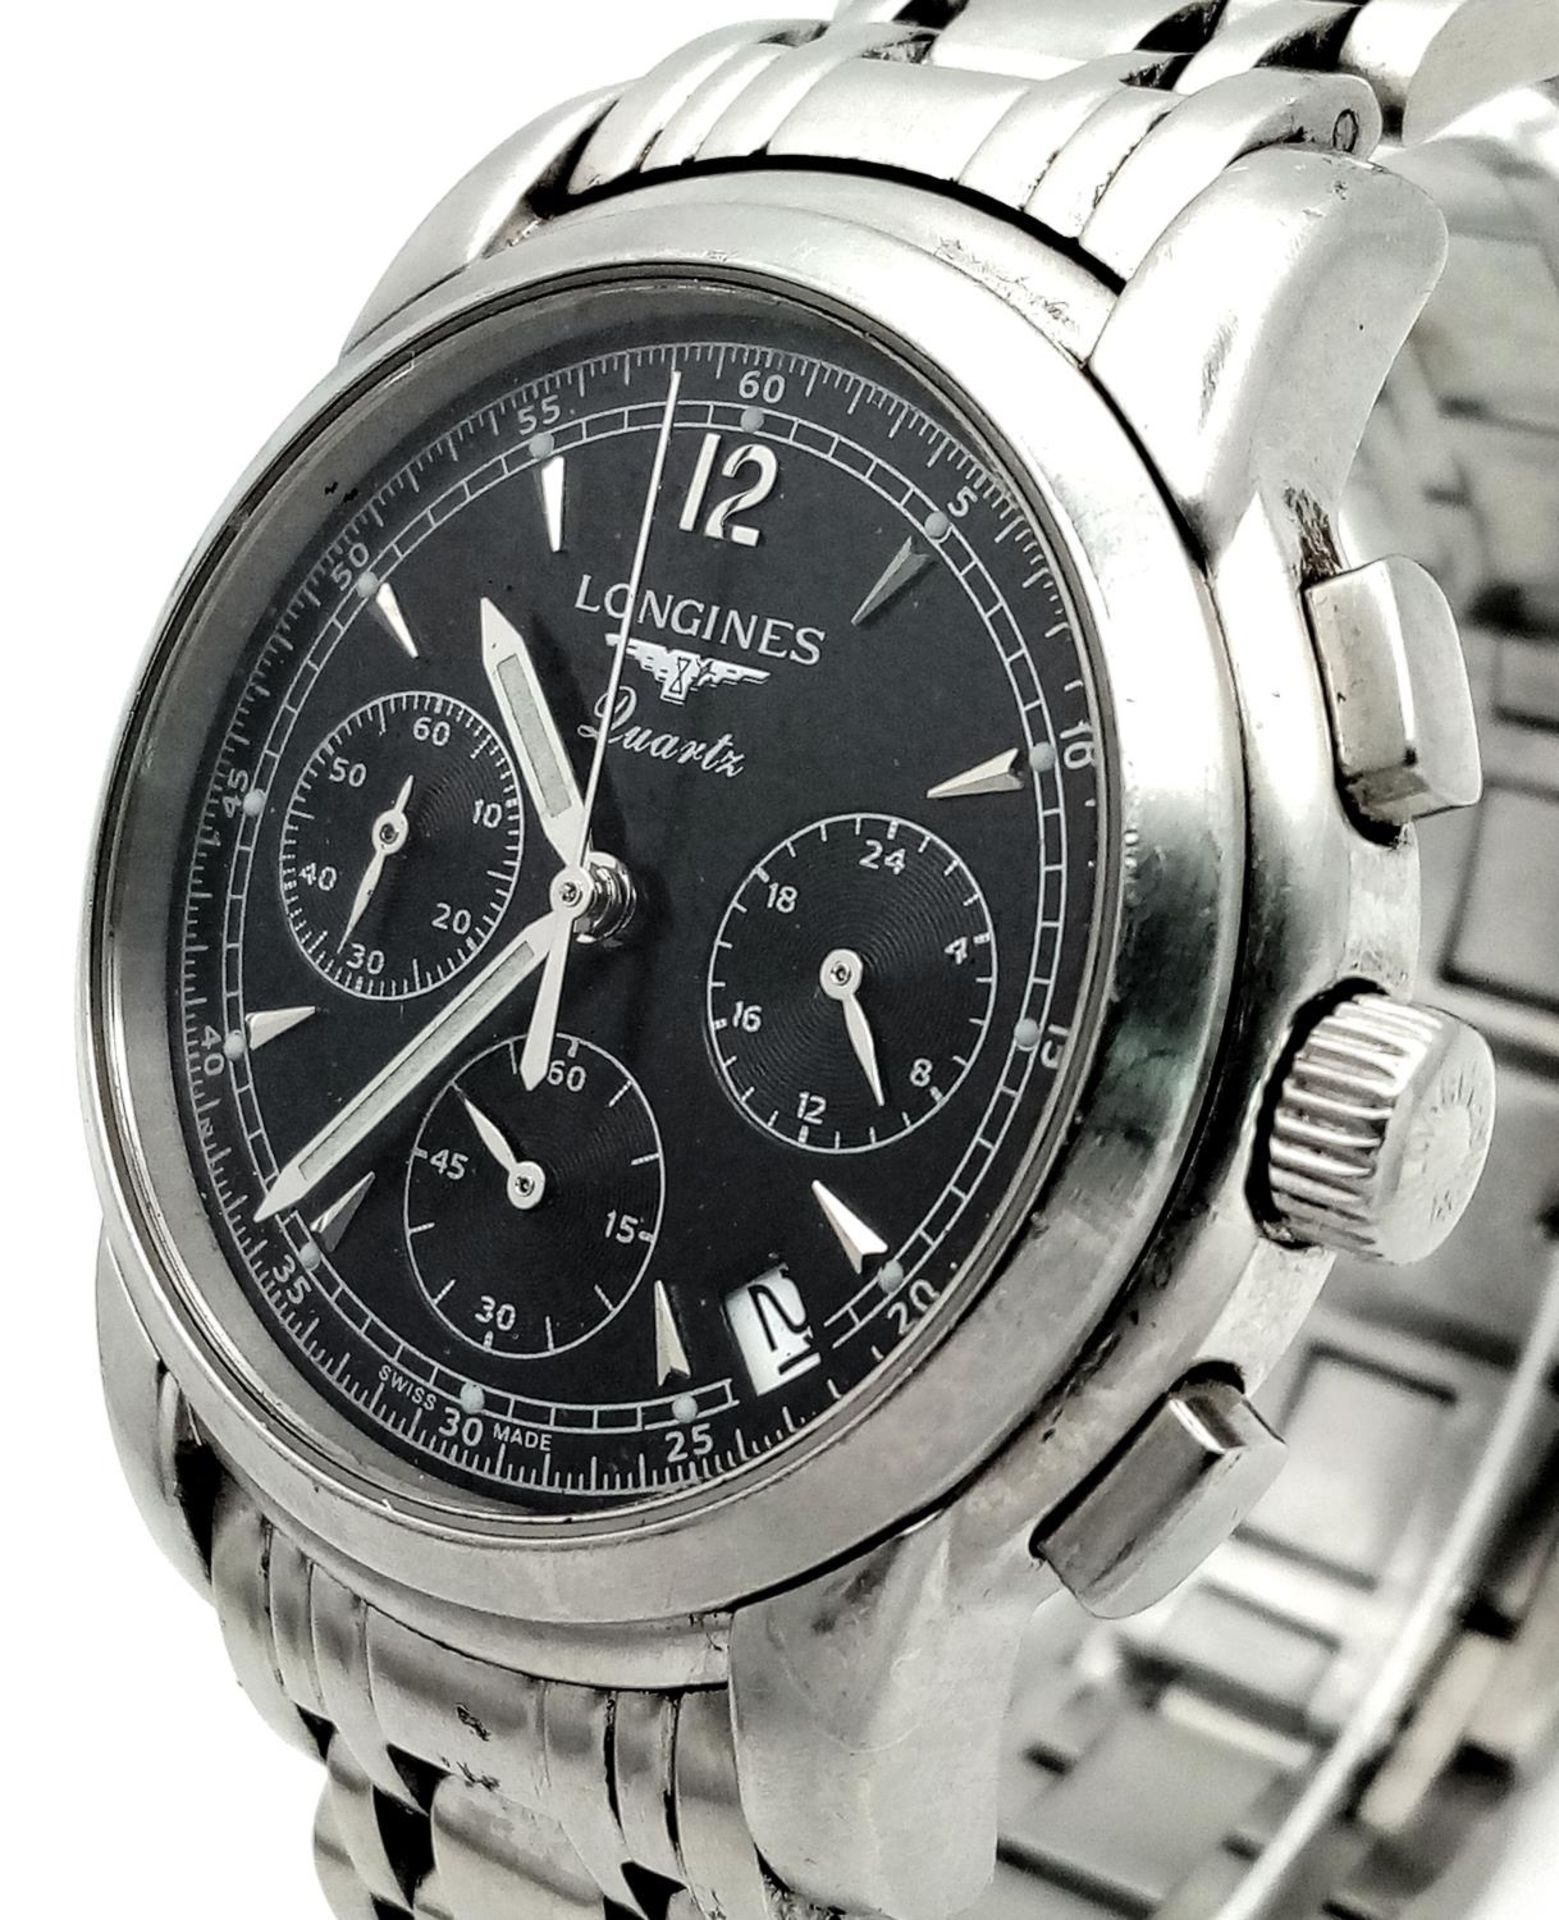 A Longine Quartz Chronograph Gents Watch. Stainless steel bracelet and case - 39mm. Black dial - Image 4 of 9